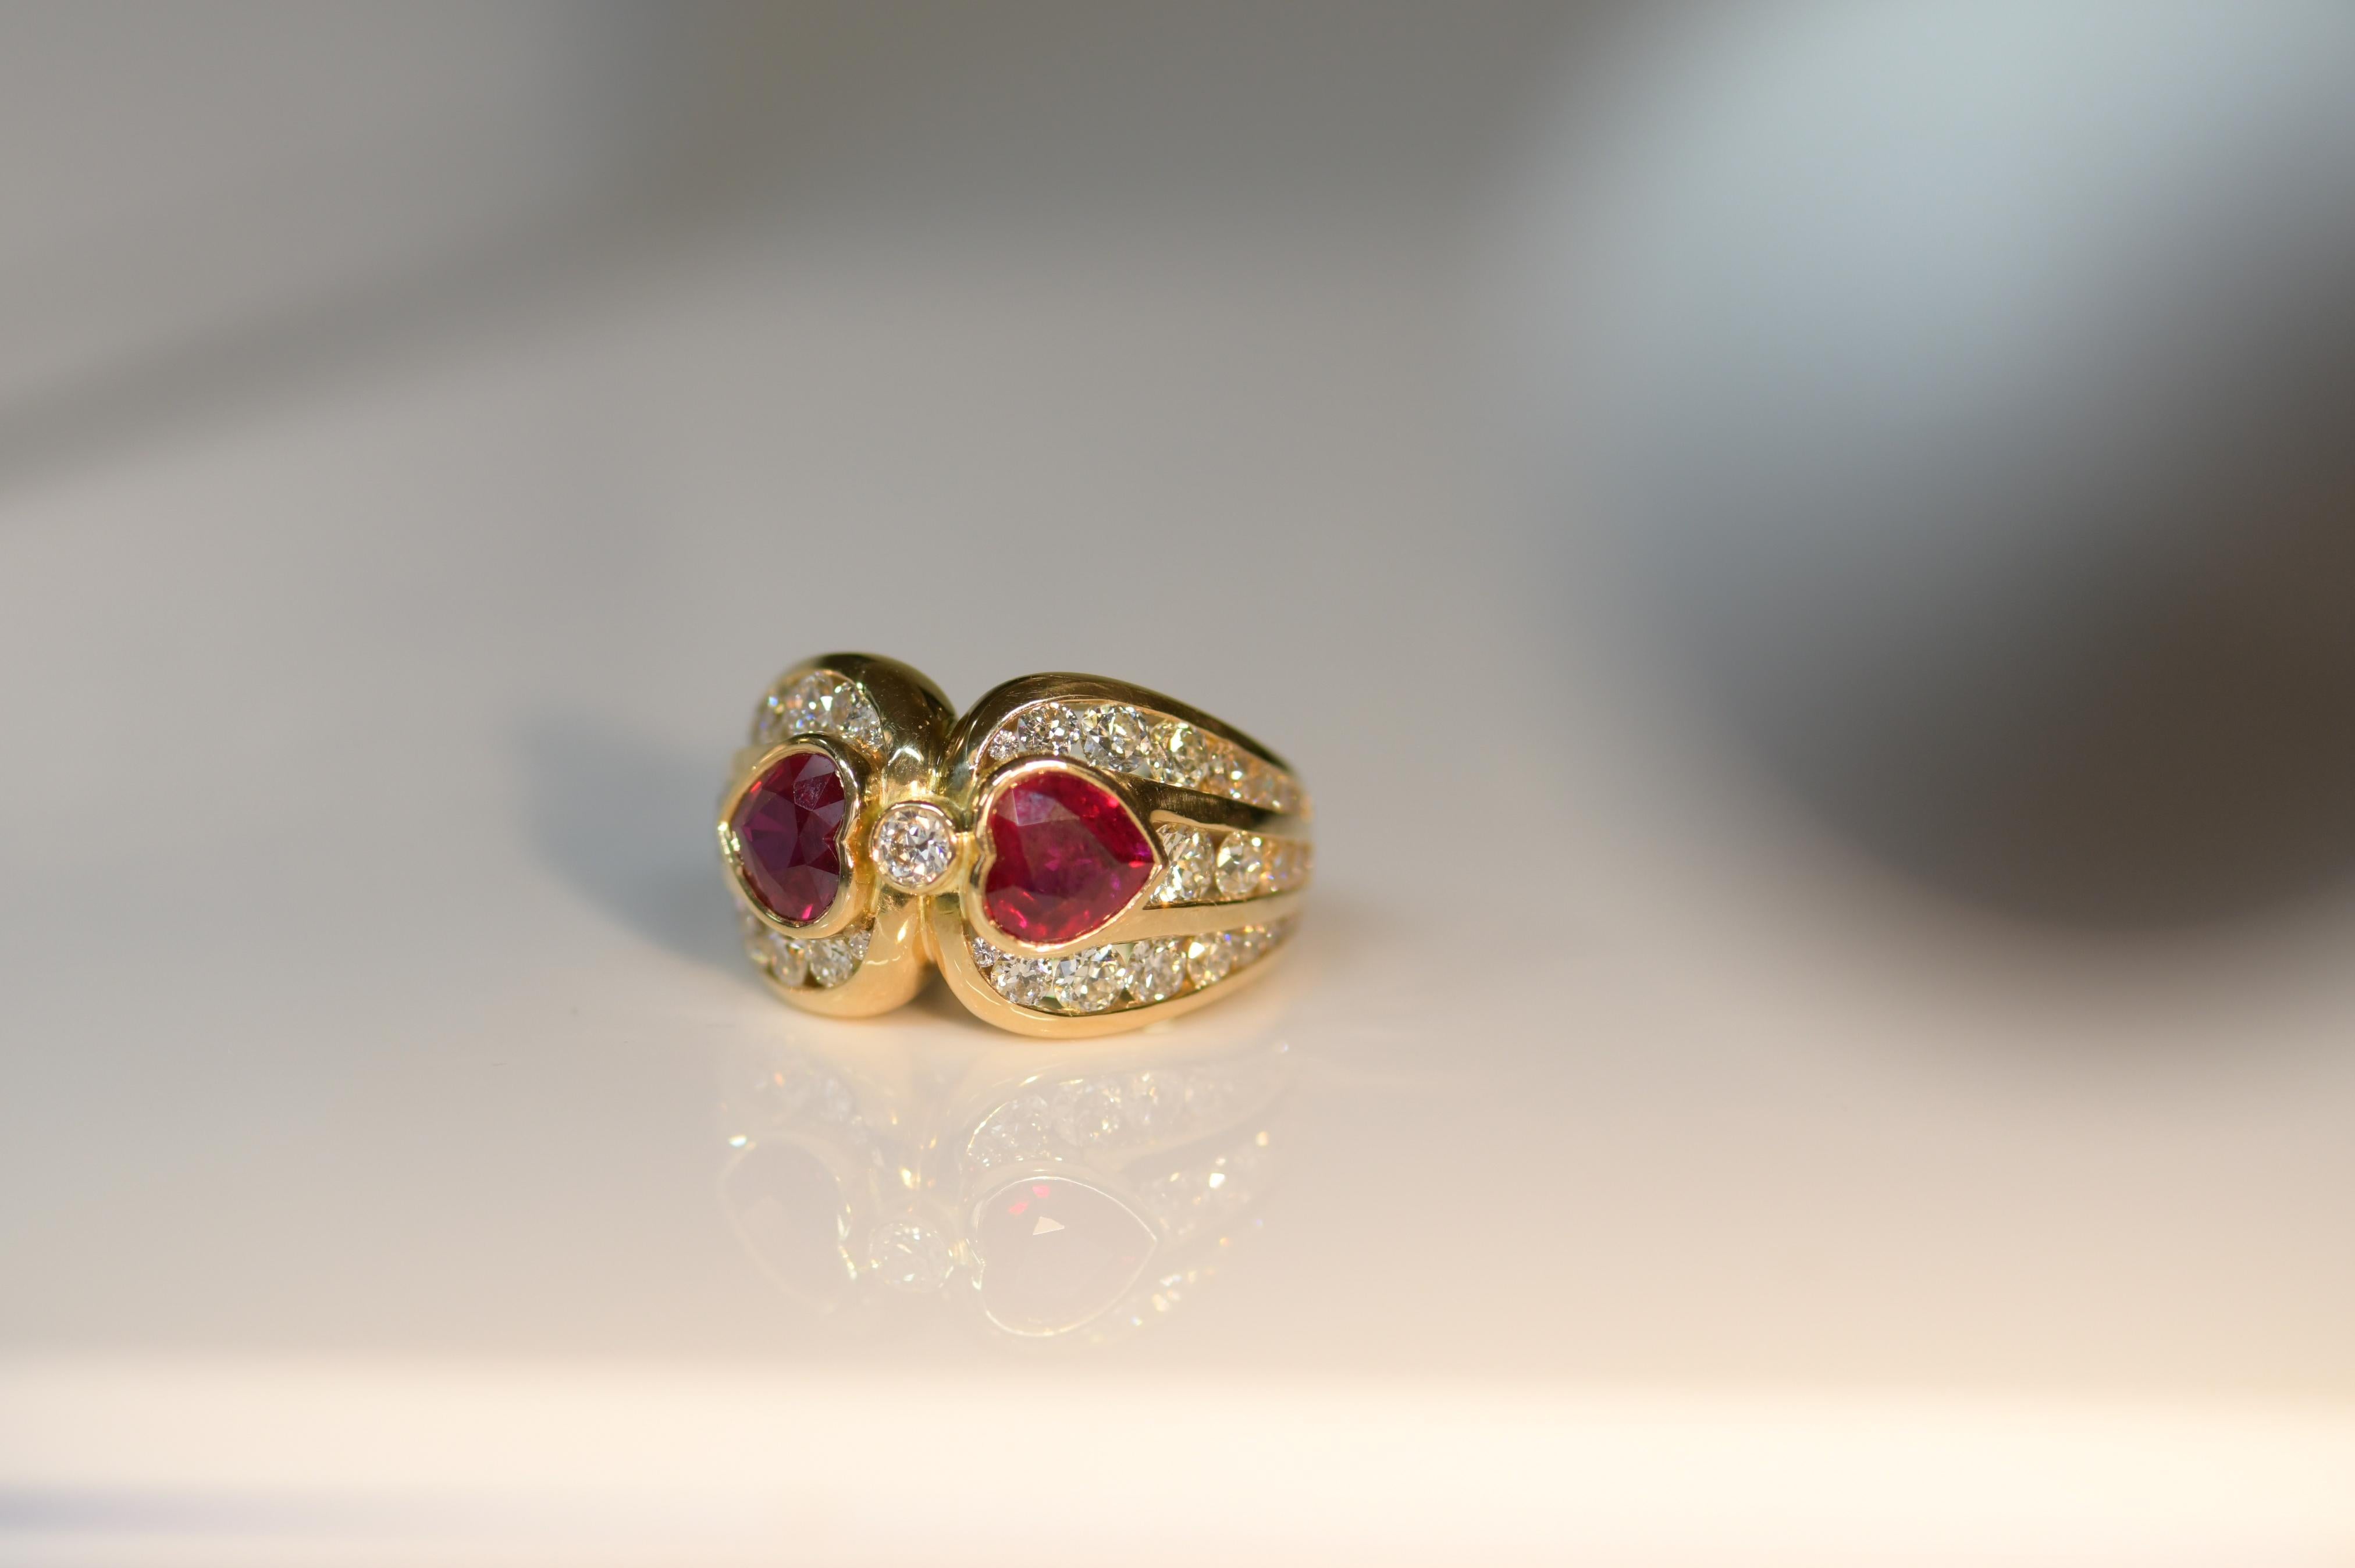 A fantastic 18ct gold double heart ring set with two good well matched natural heart shaped Burma rubies surrounded by white diamonds. It would make a wonderful engagement ring.
Ruby Total：1.85 ct
Diamond：1.95 ct
SizeN
Weight：10.78g